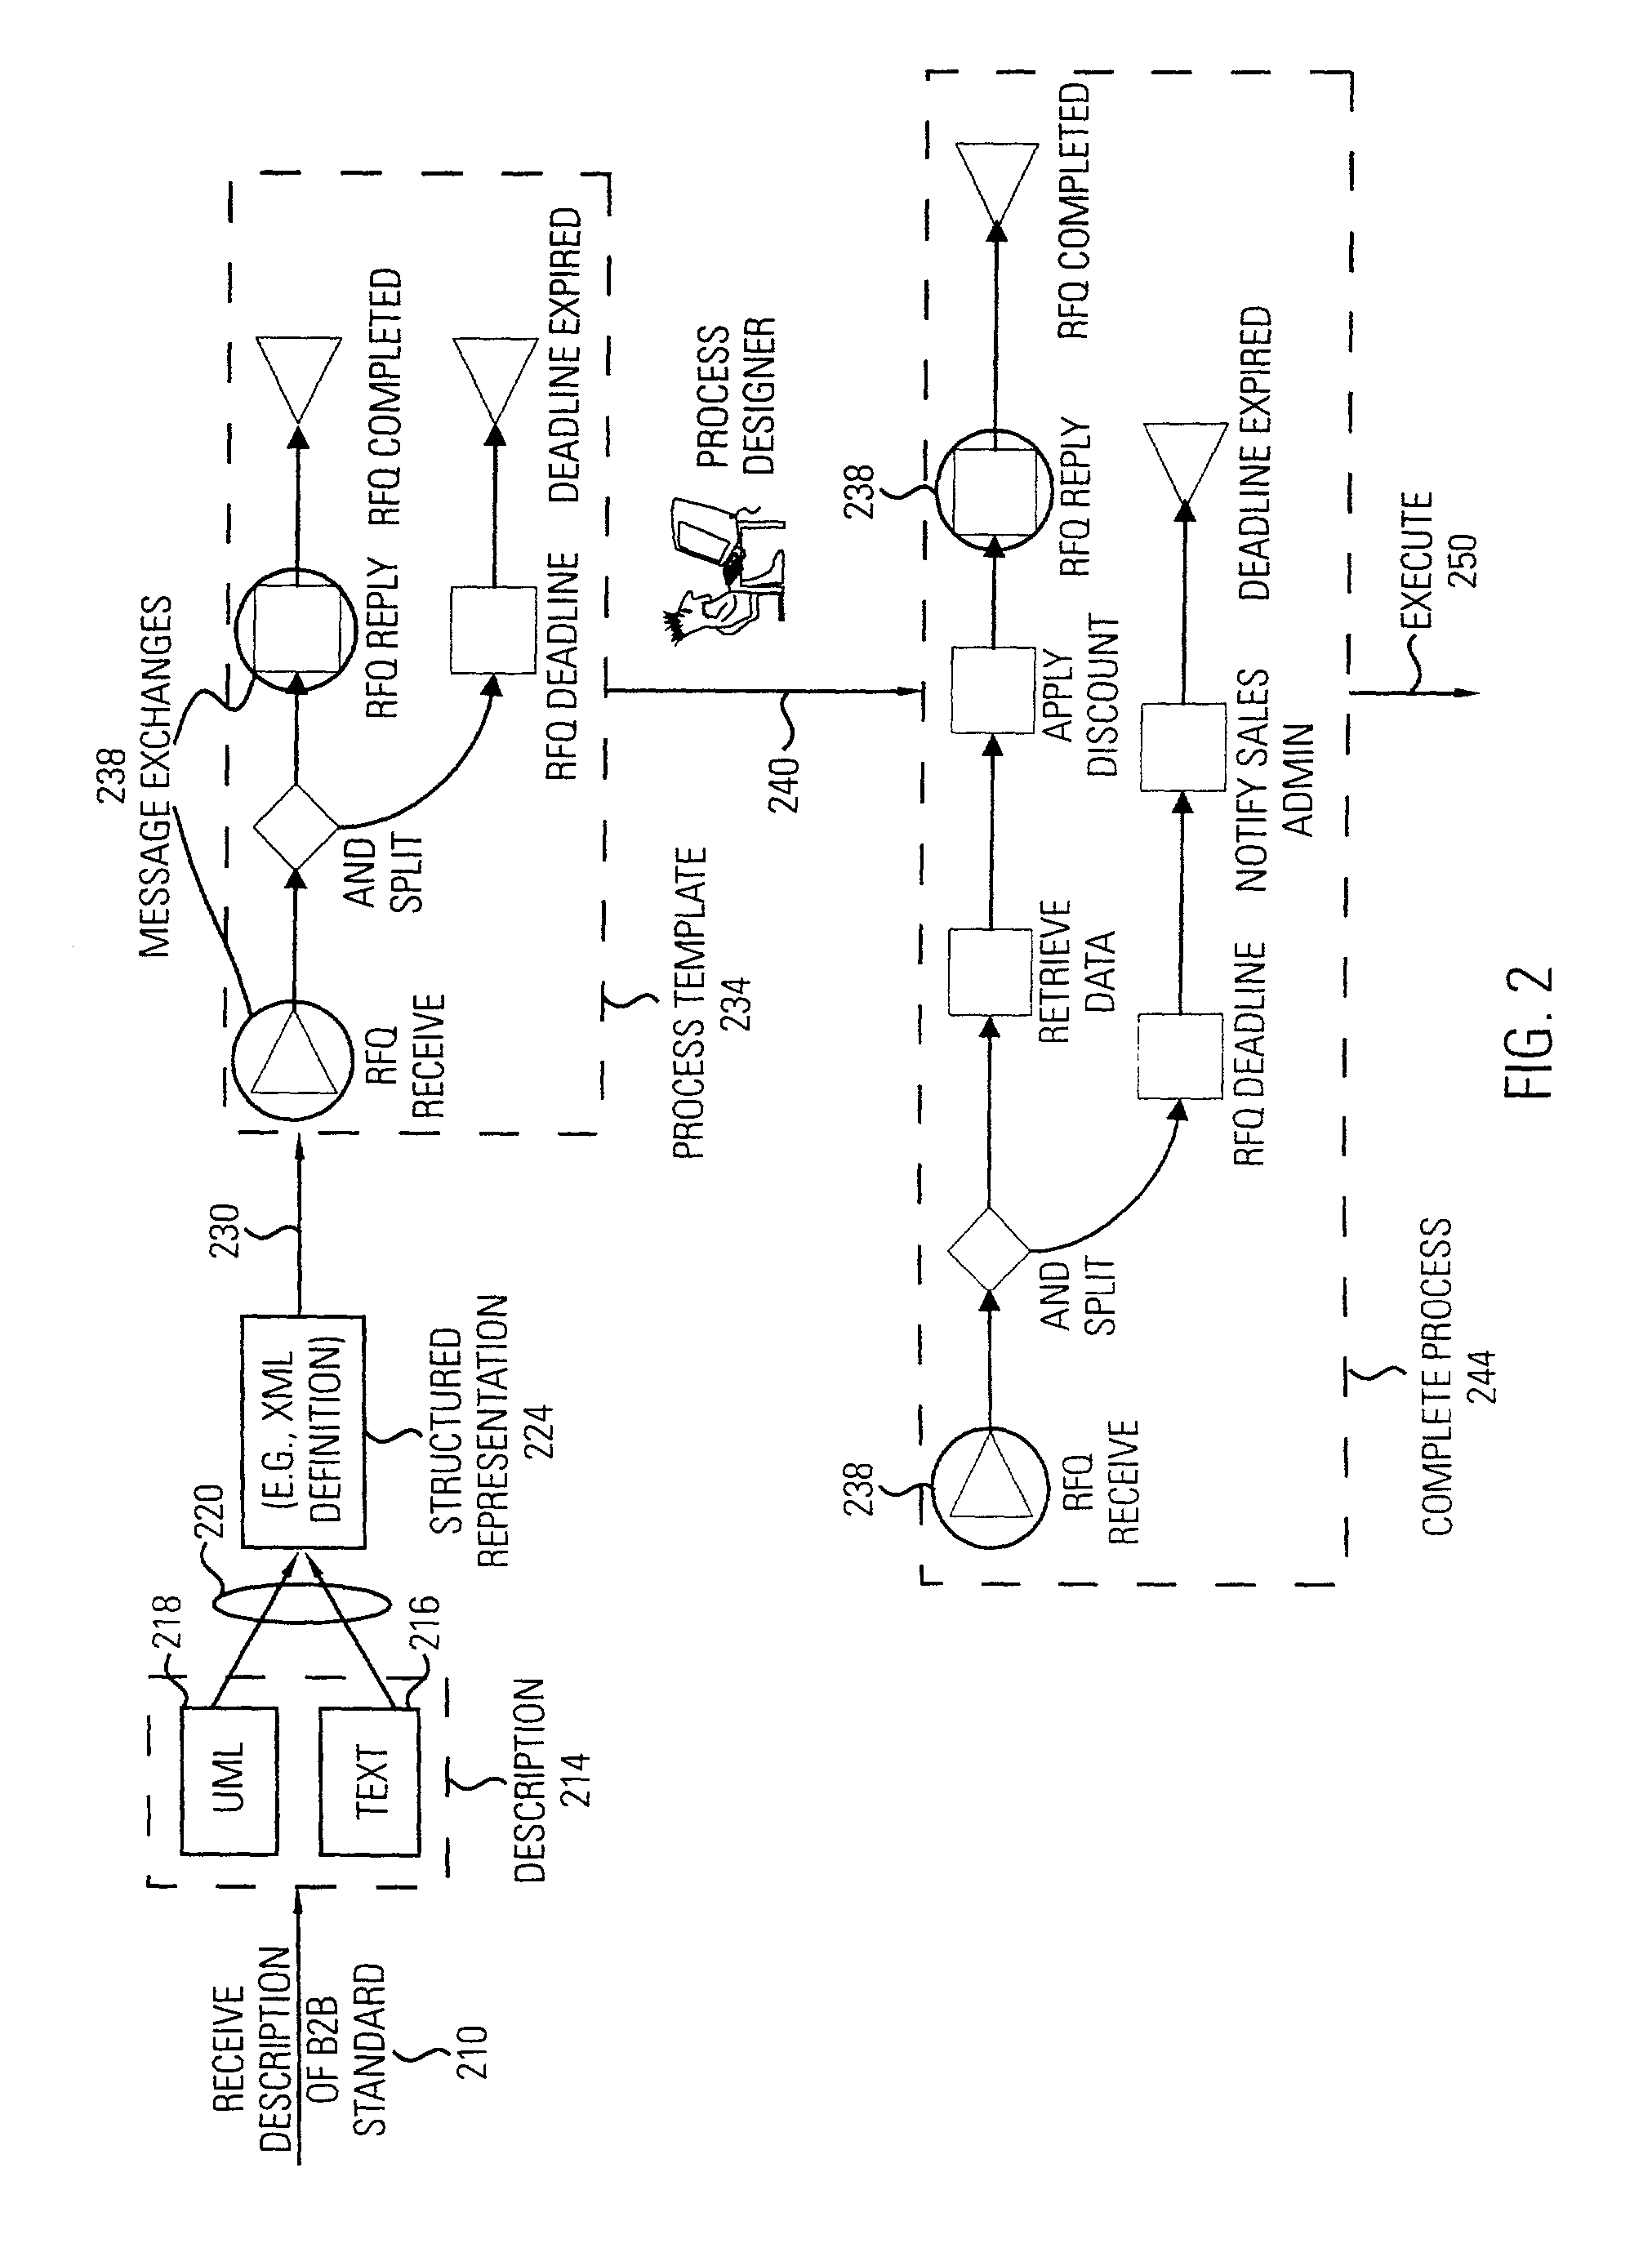 Method and system for integrating workflow management systems with business-to-business interaction standards